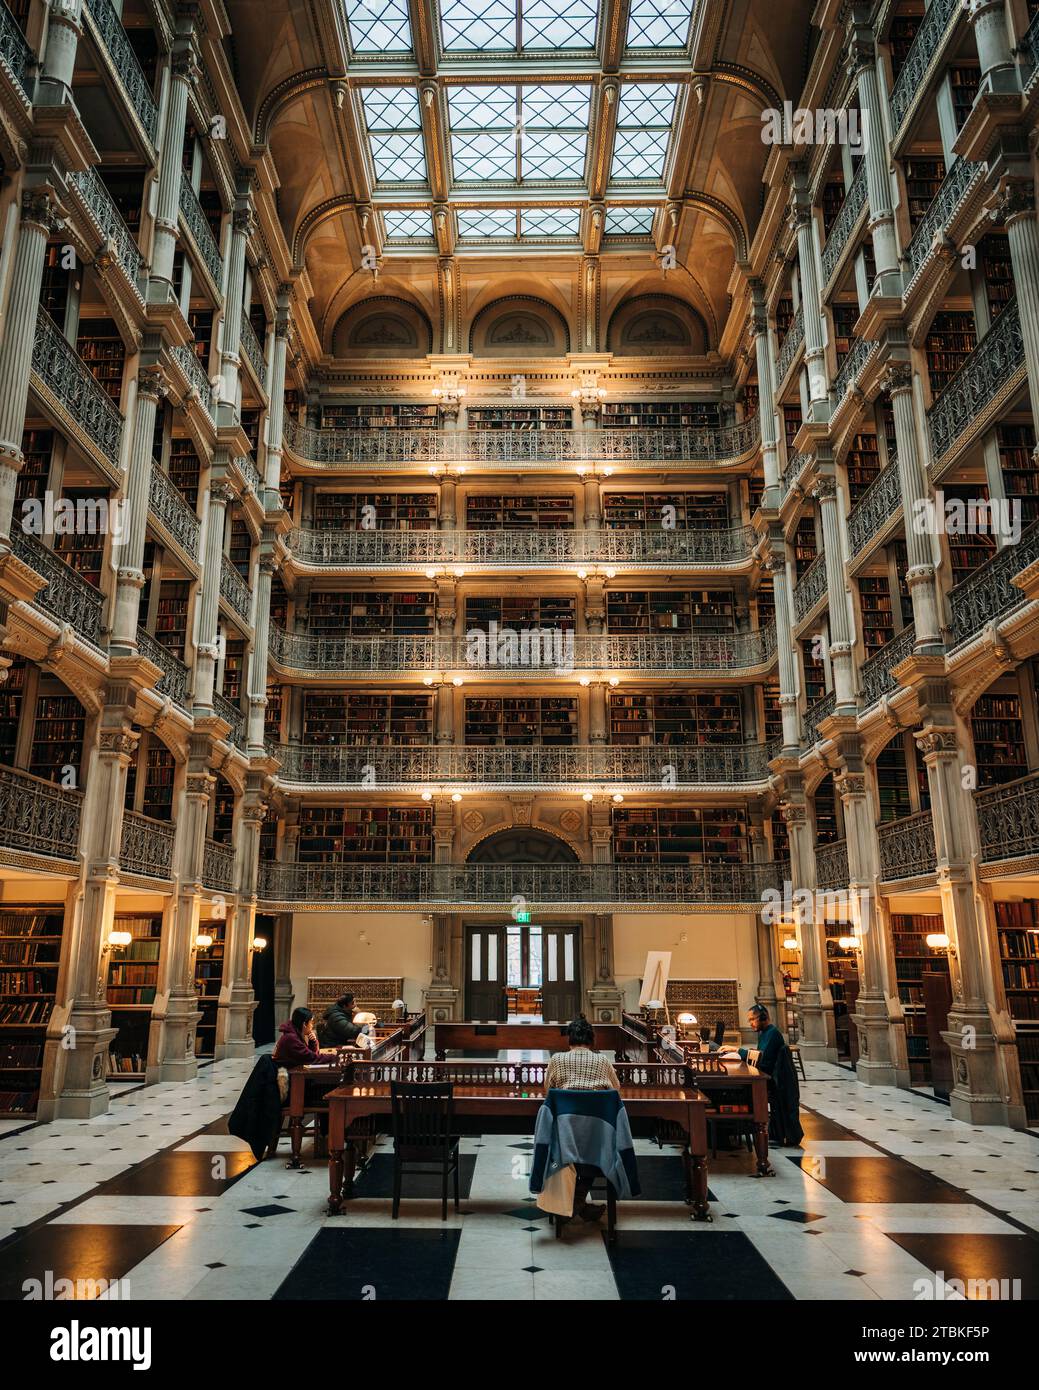 Interior of George Peabody Library, Baltimore, Maryland Stock Photo